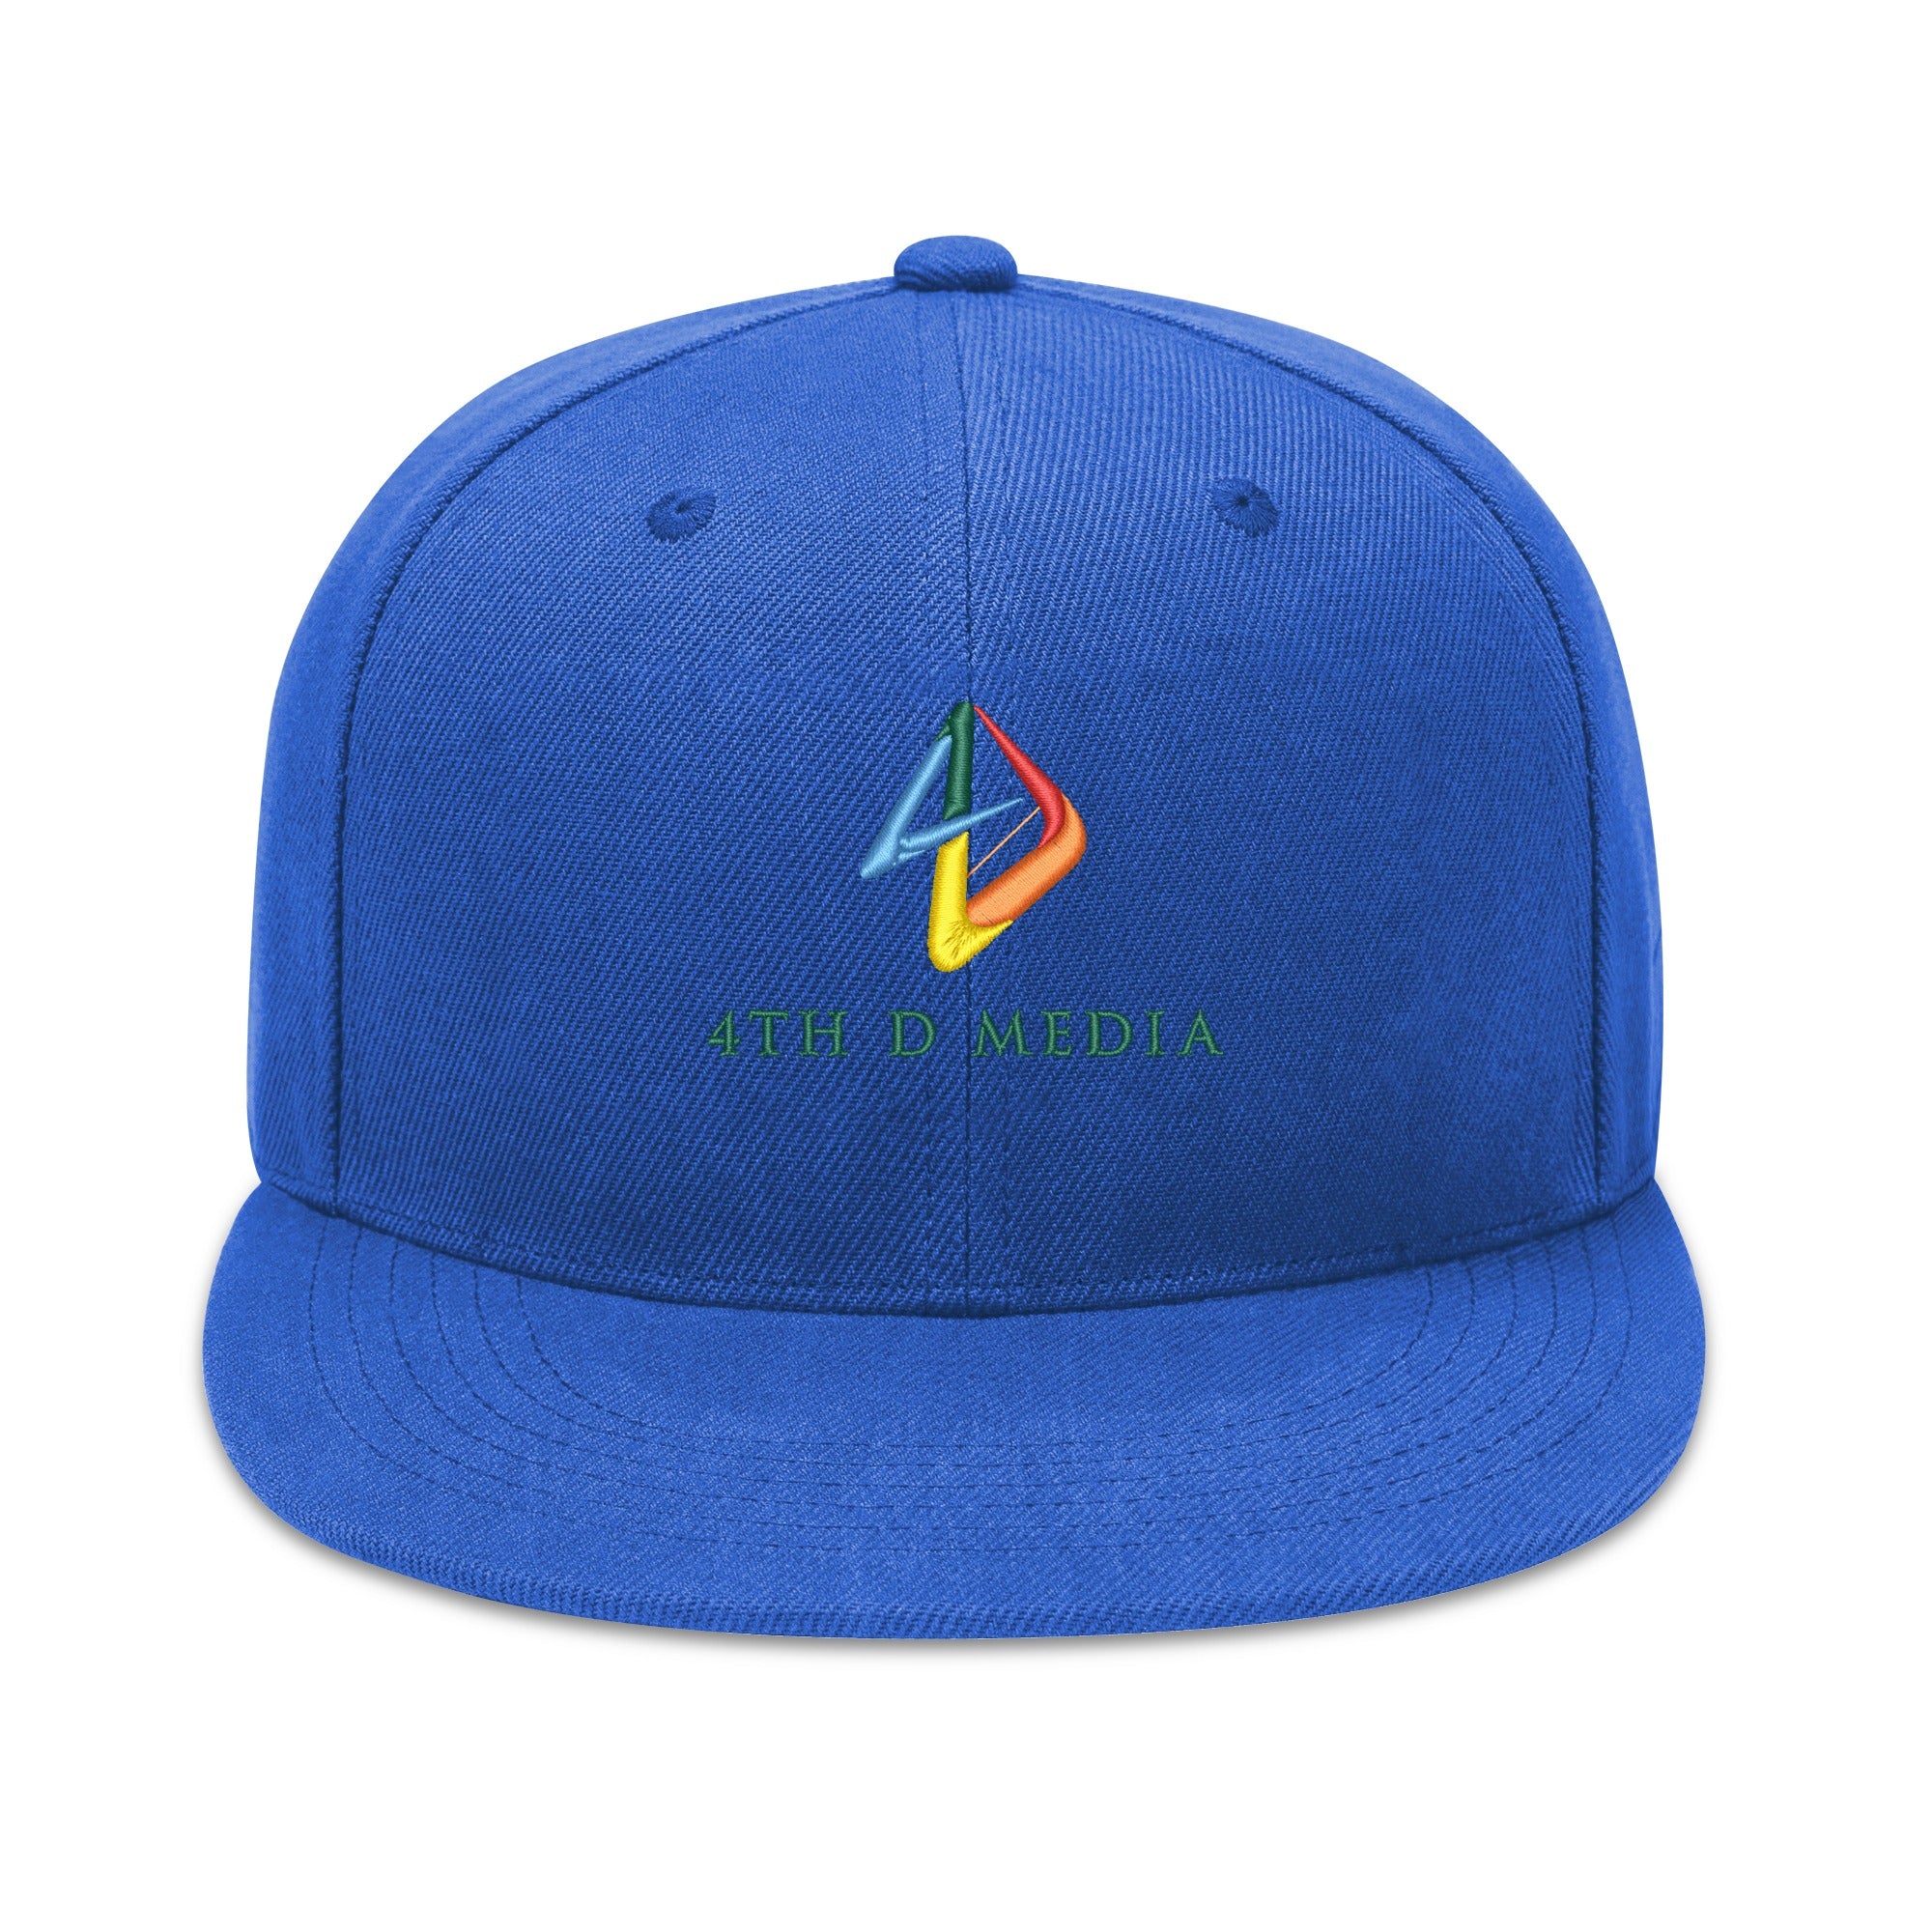 4th Dimension Media Embroidered Hats